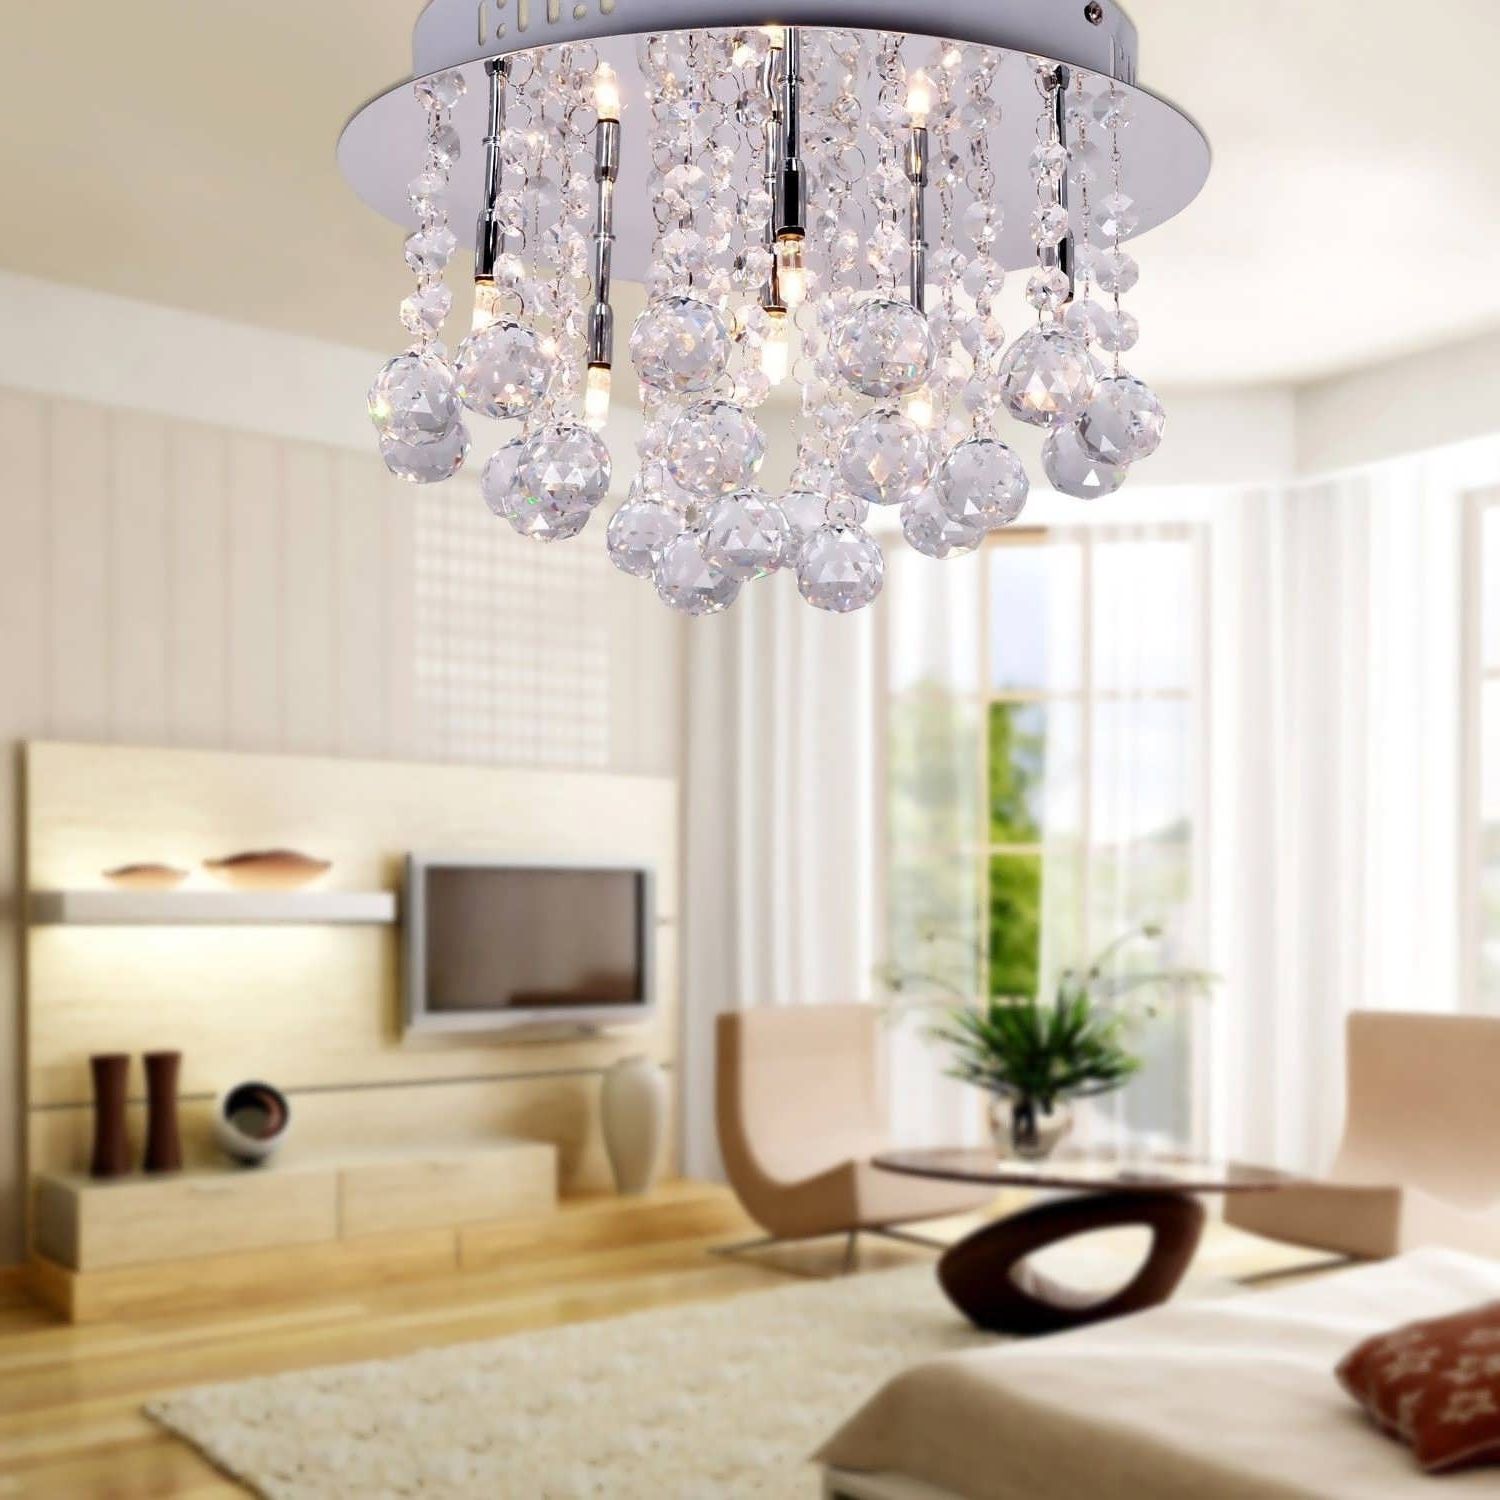 Preferred Restoration Hardware Chandelier Tags : Magnificent Restoration Pertaining To Florian Crystal Chandeliers (Photo 13 of 15)